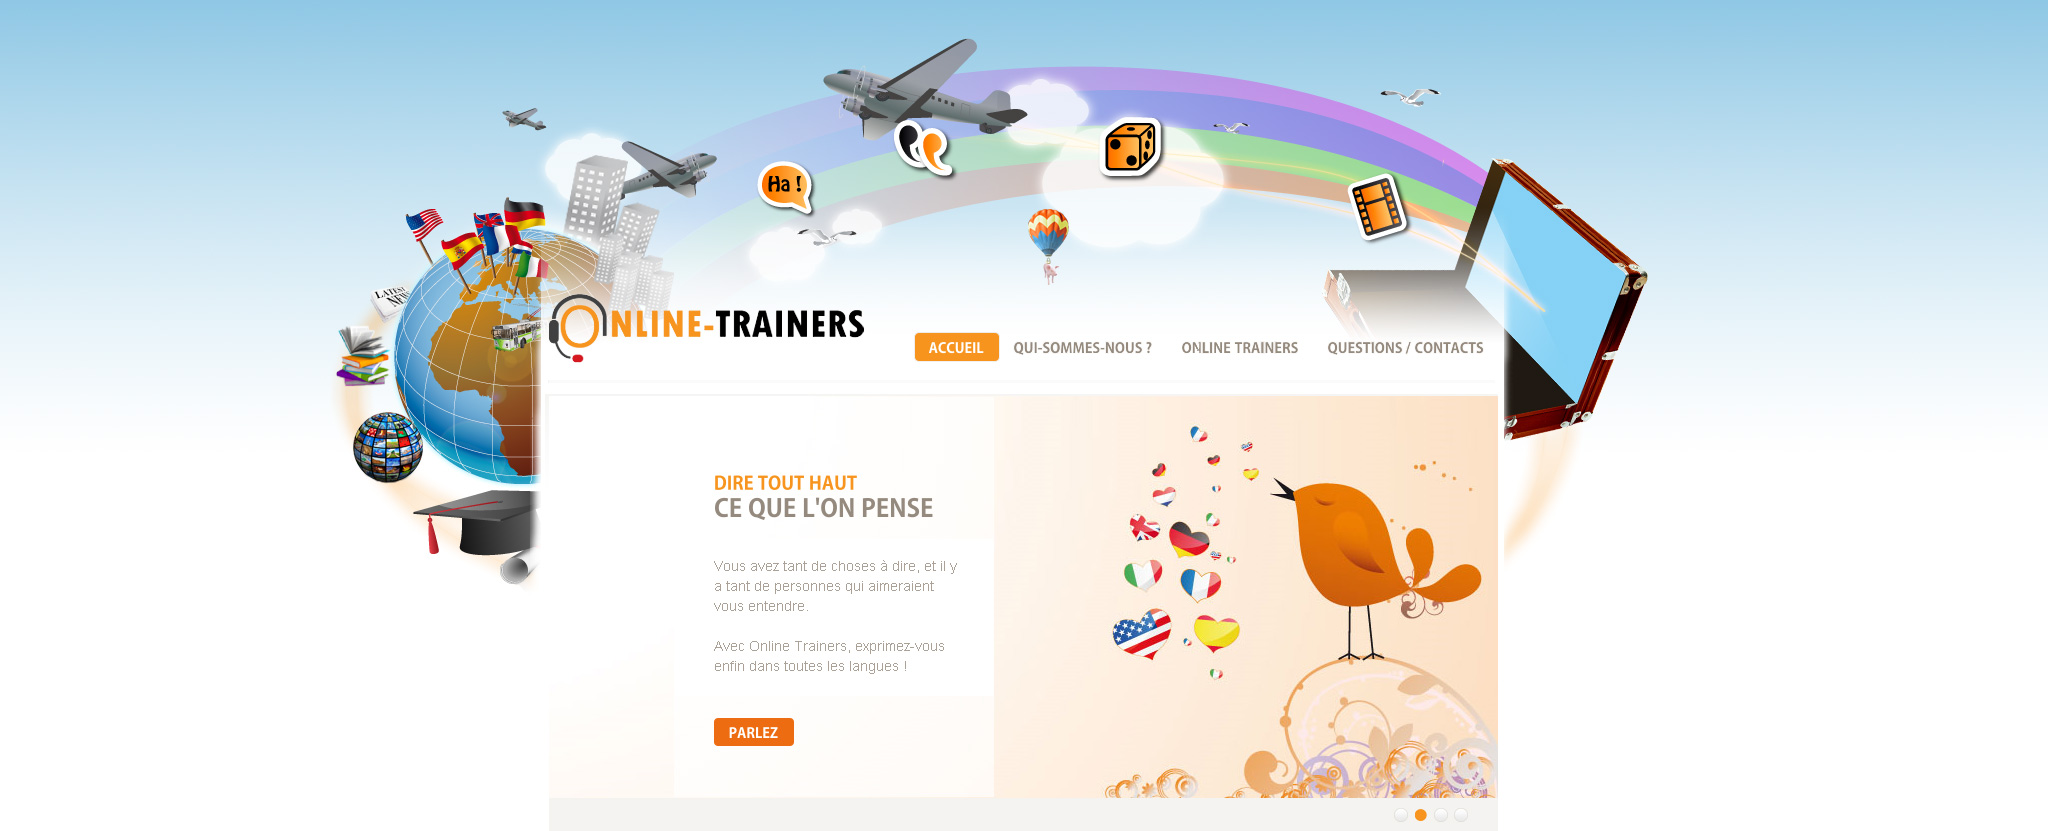 Online Trainers-2